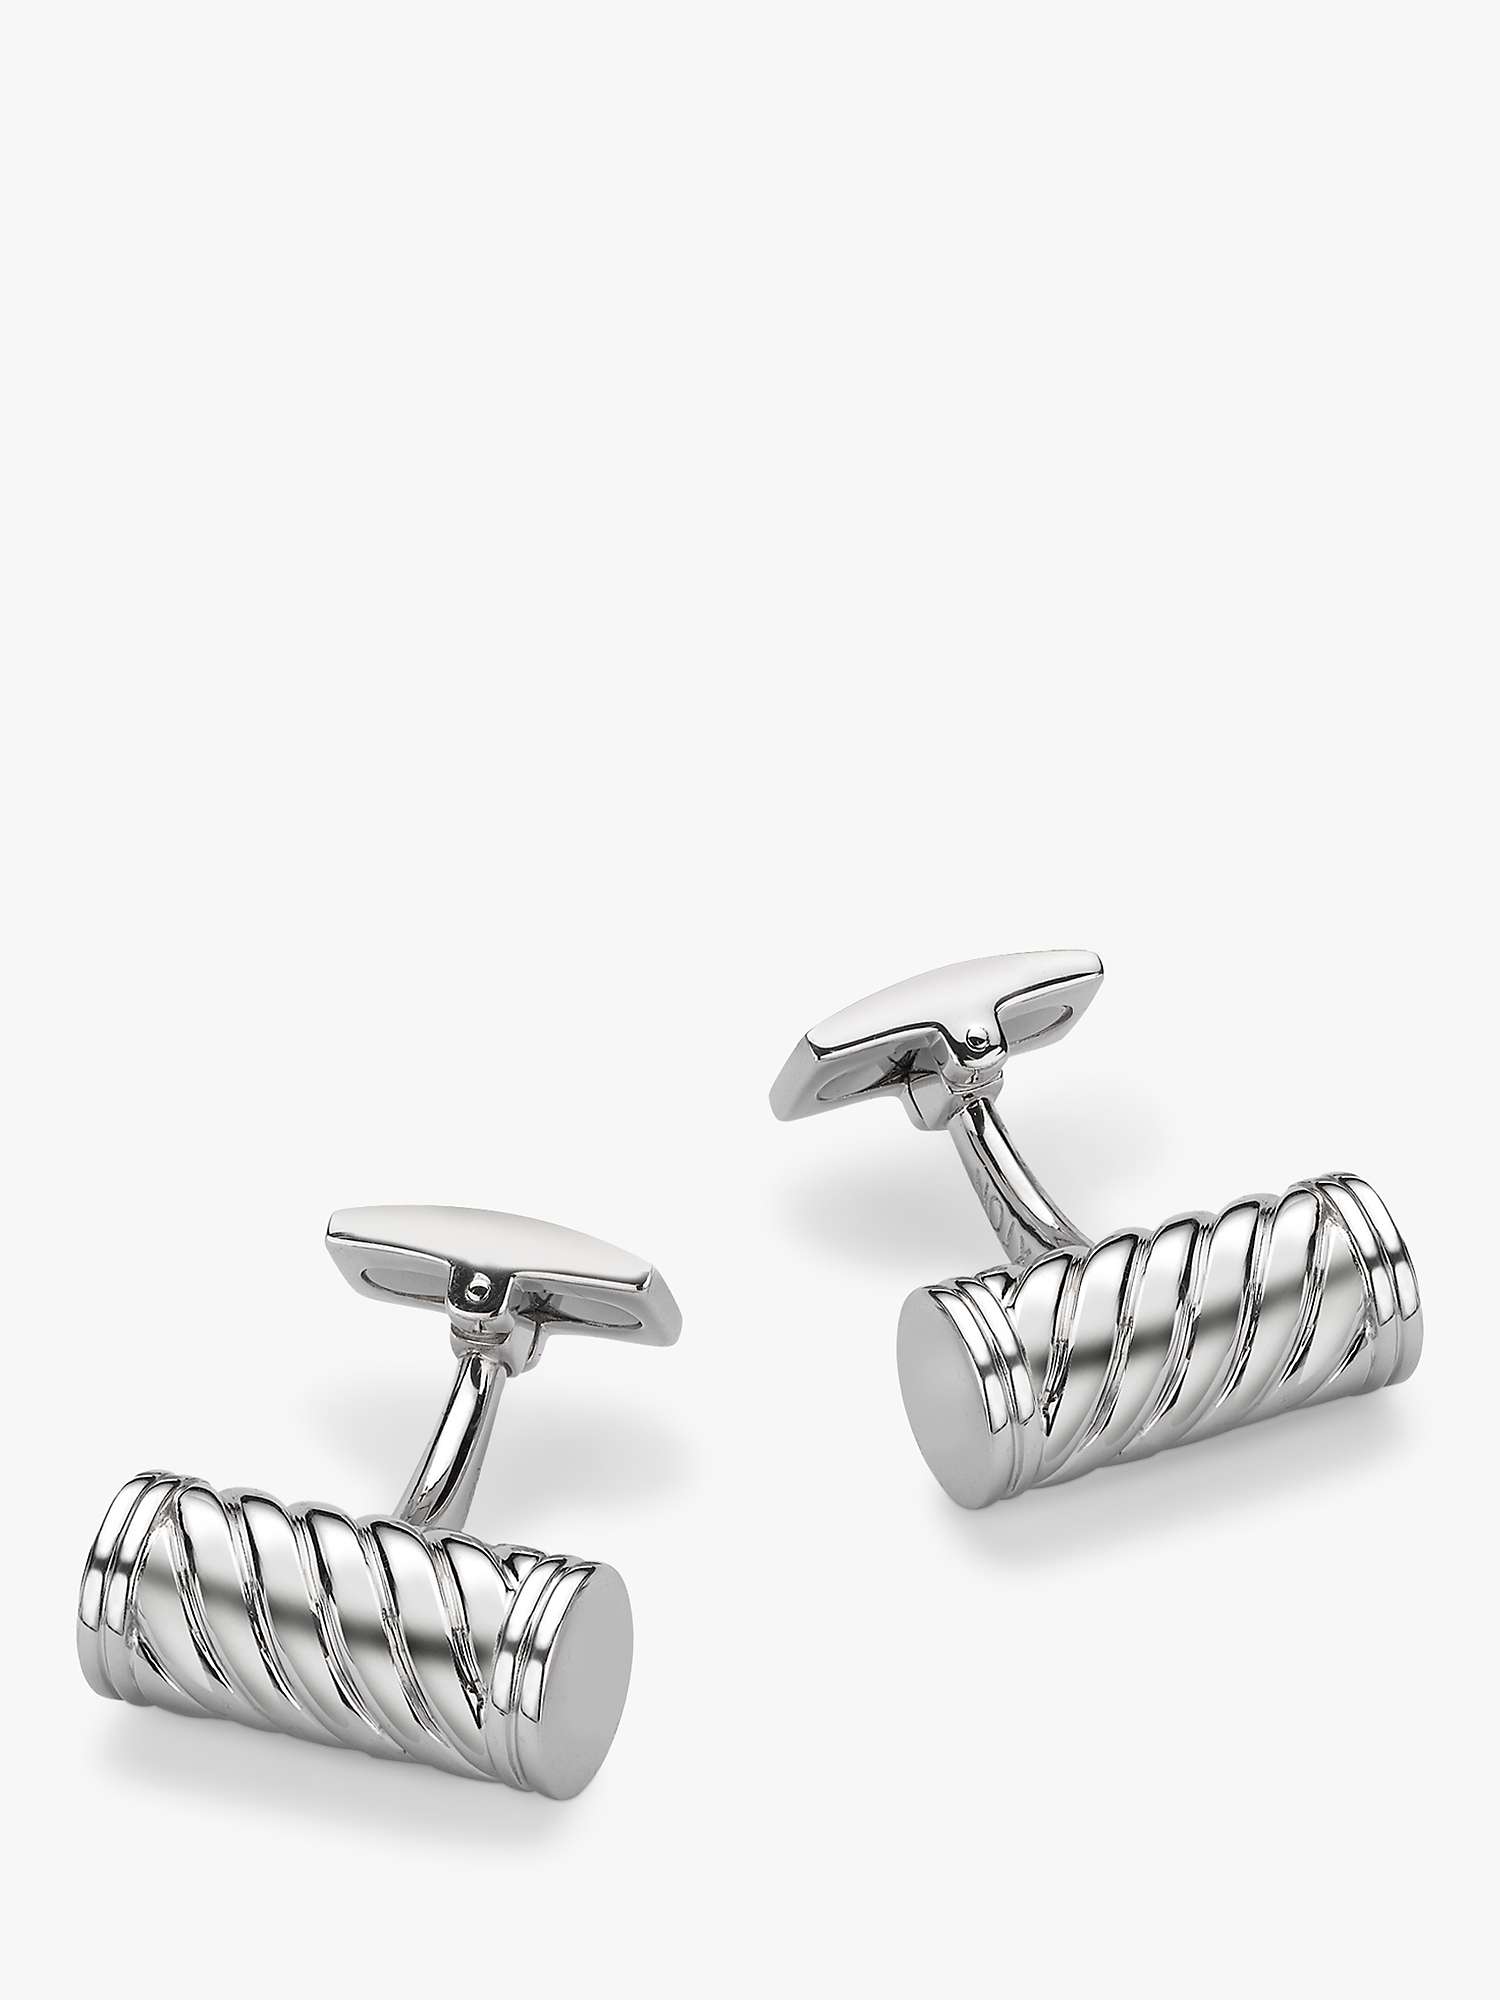 Buy Hoxton London Twist Cylindrical Cufflinks, Silver Online at johnlewis.com